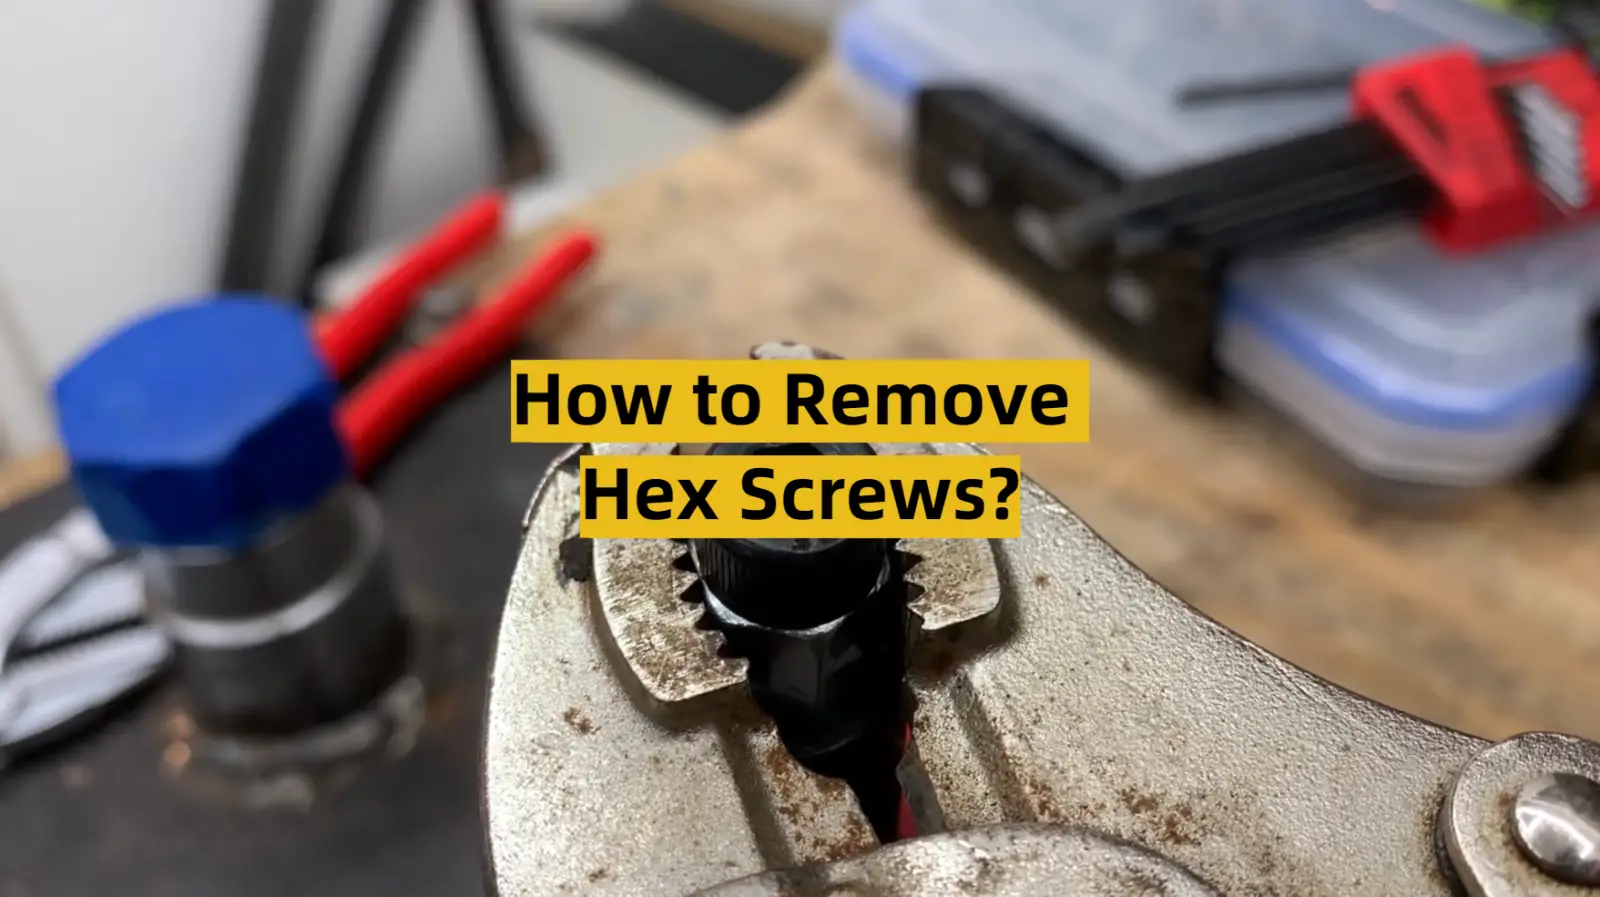 How to Remove Hex Screws?